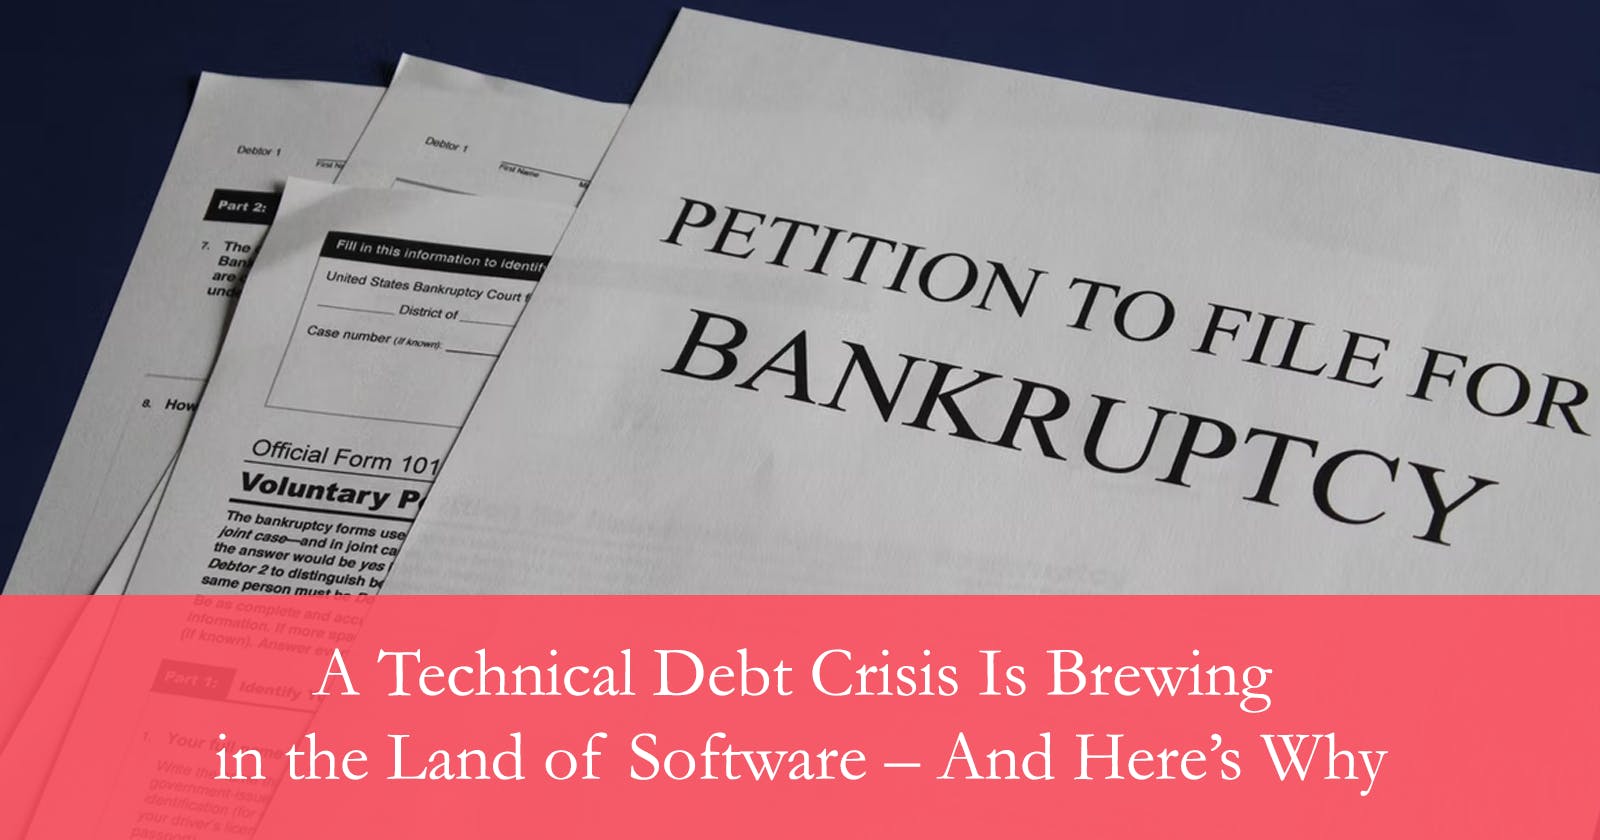 A Technical Debt Crisis Is Brewing in the Land of Software – And Here’s Why